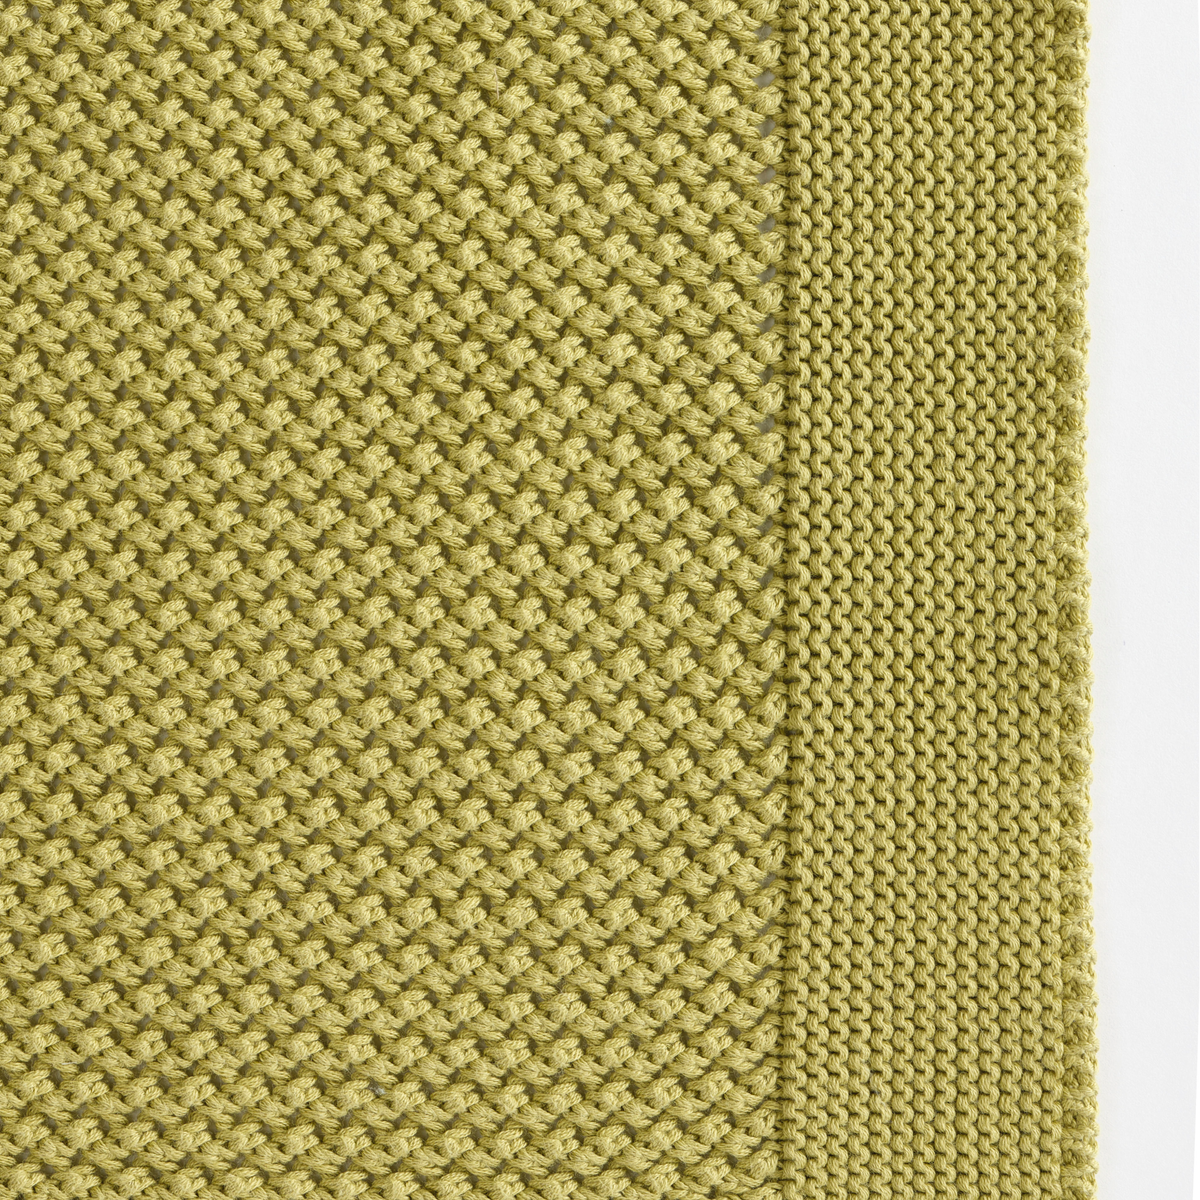 Swatch Sample of Celso de Lemos Balade Throw in Green Fougere